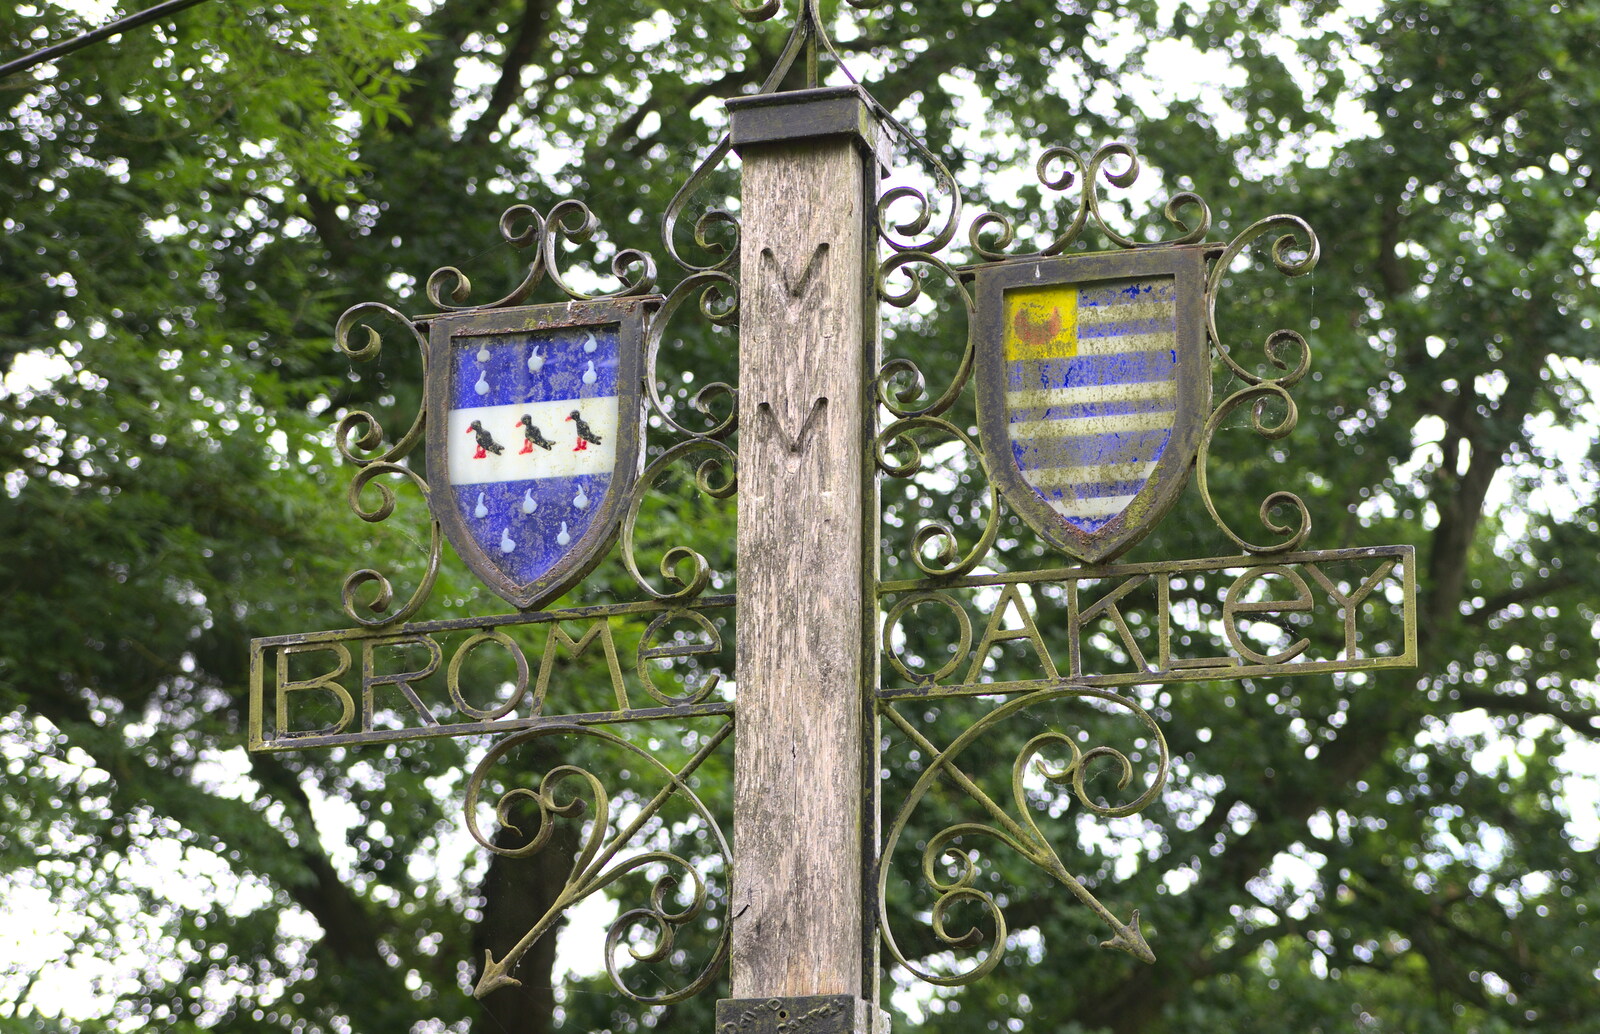 The Brome and Oakley village sign from The Village Summer Fête, Brome, Suffolk - 5th July 2014